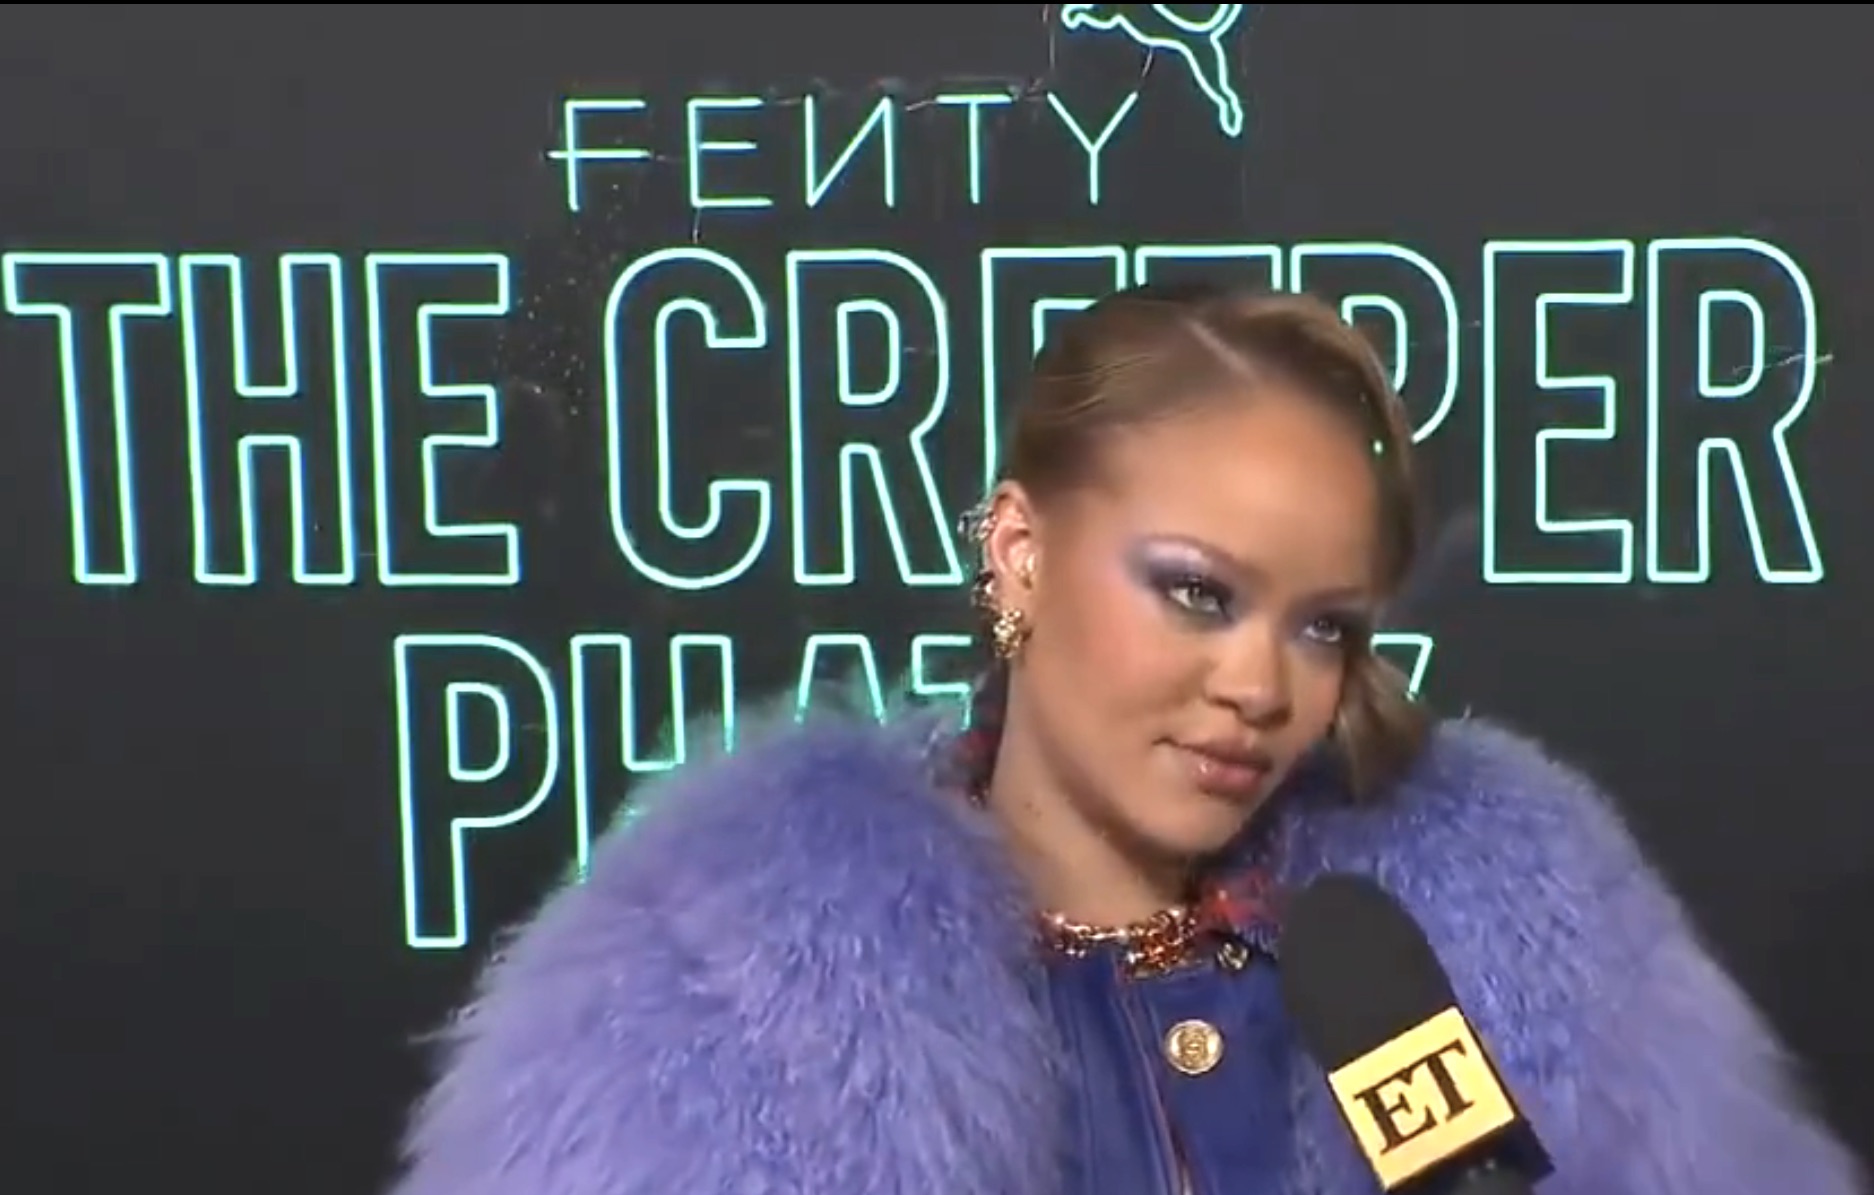 Rihanna Dishes on New Music & Tour: “It’s Only Fair My Fans Get What They’re Waiting For”